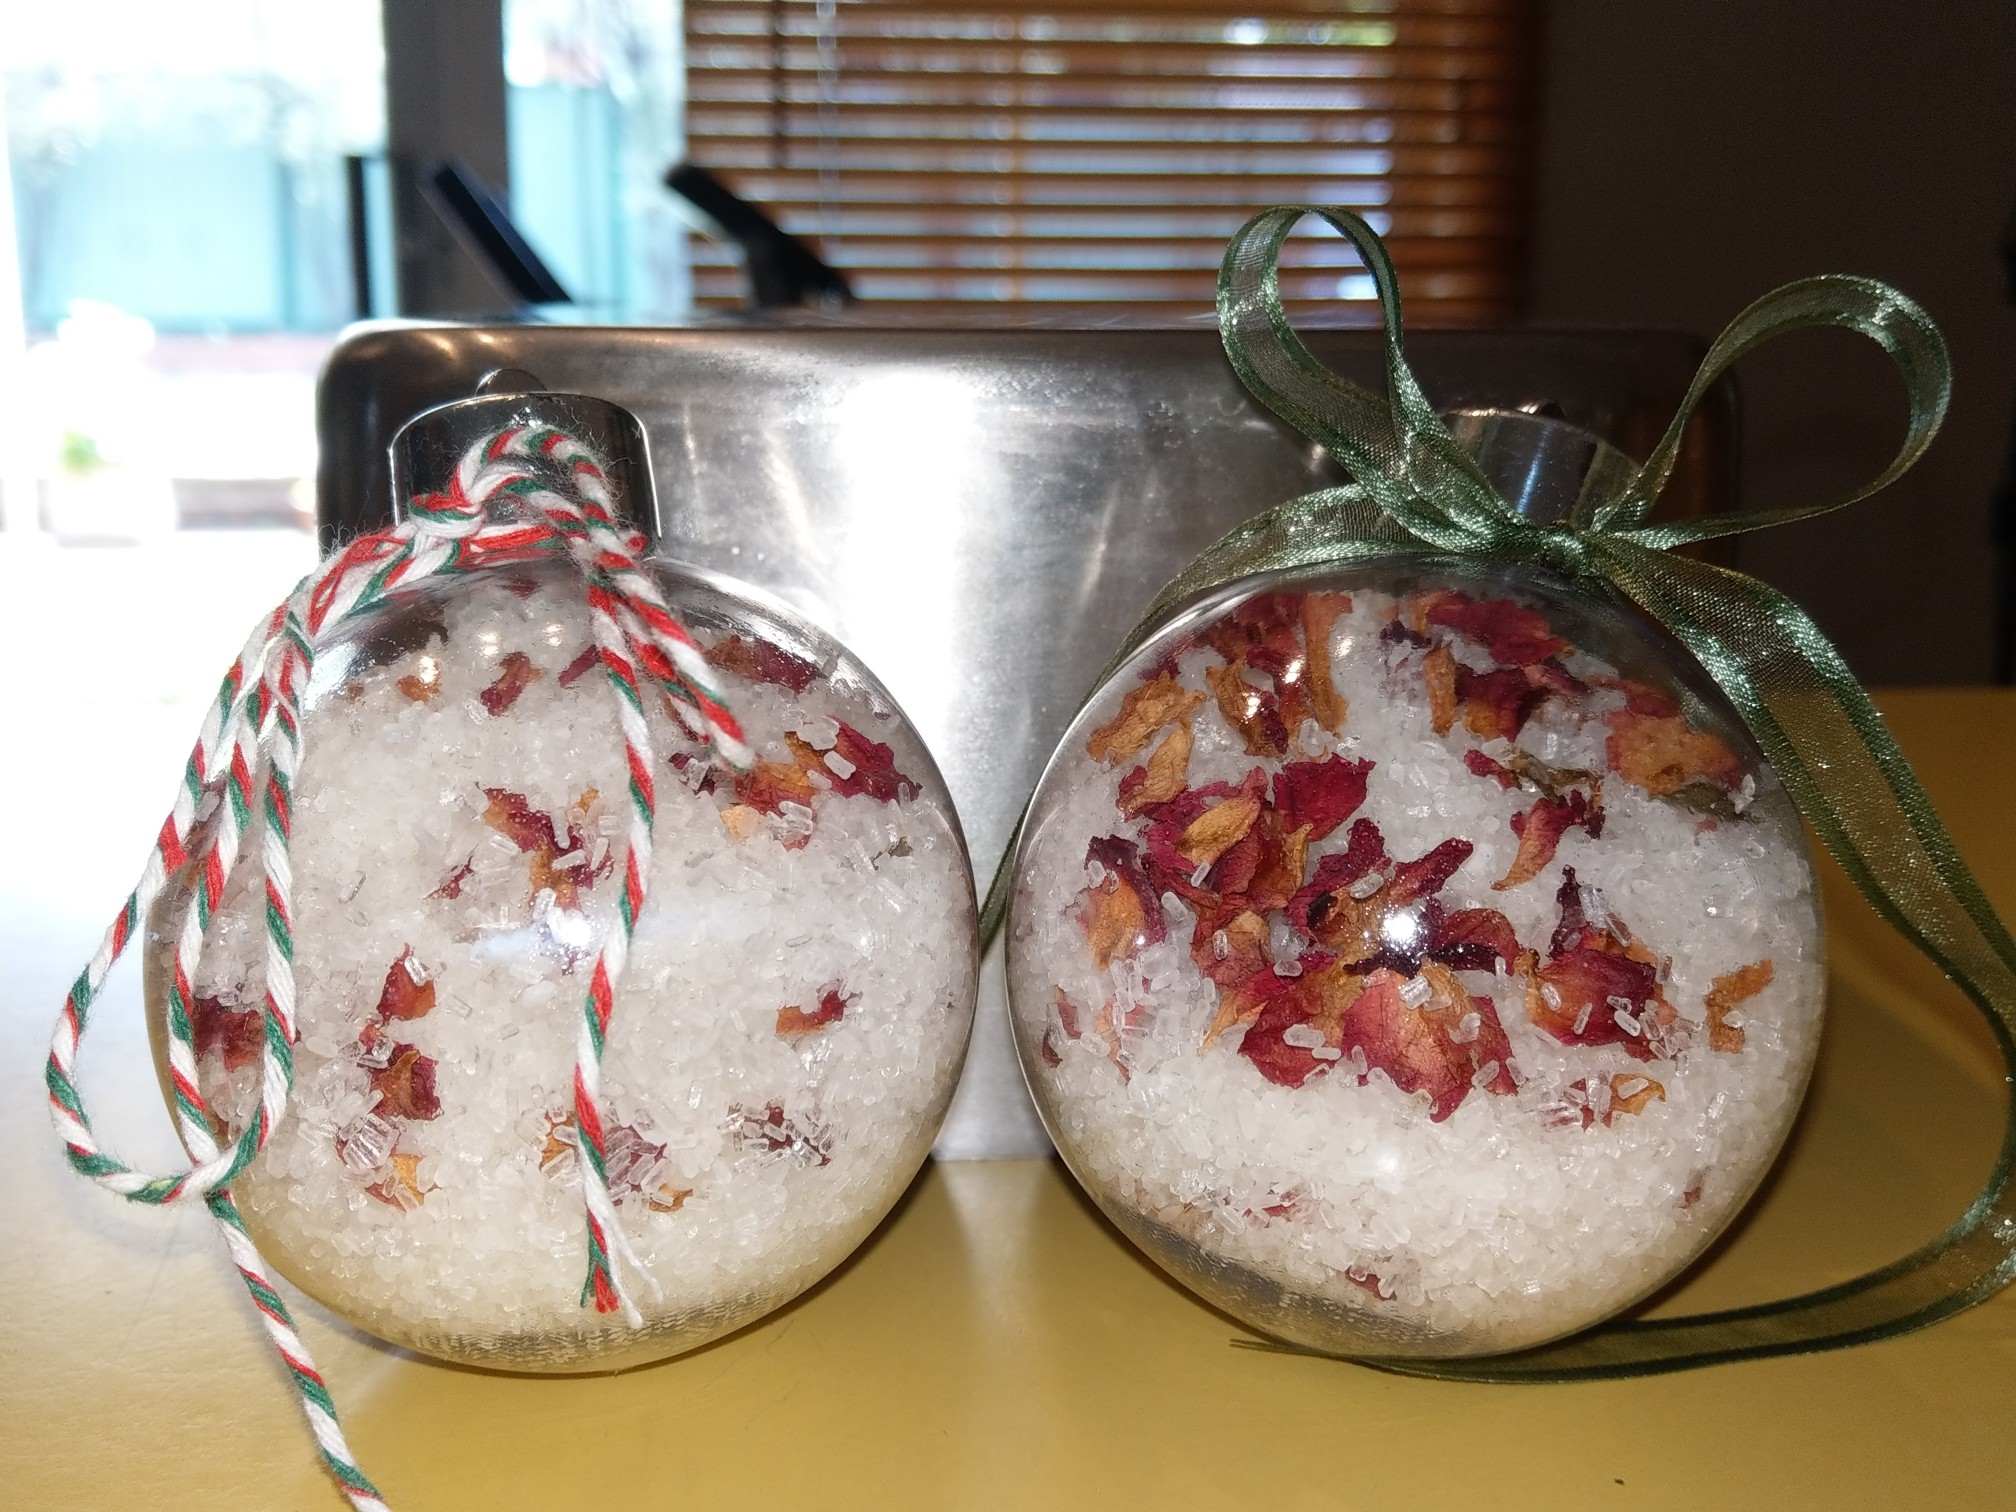 Homemade Christmas Gifts: Scented Bath Salts 7